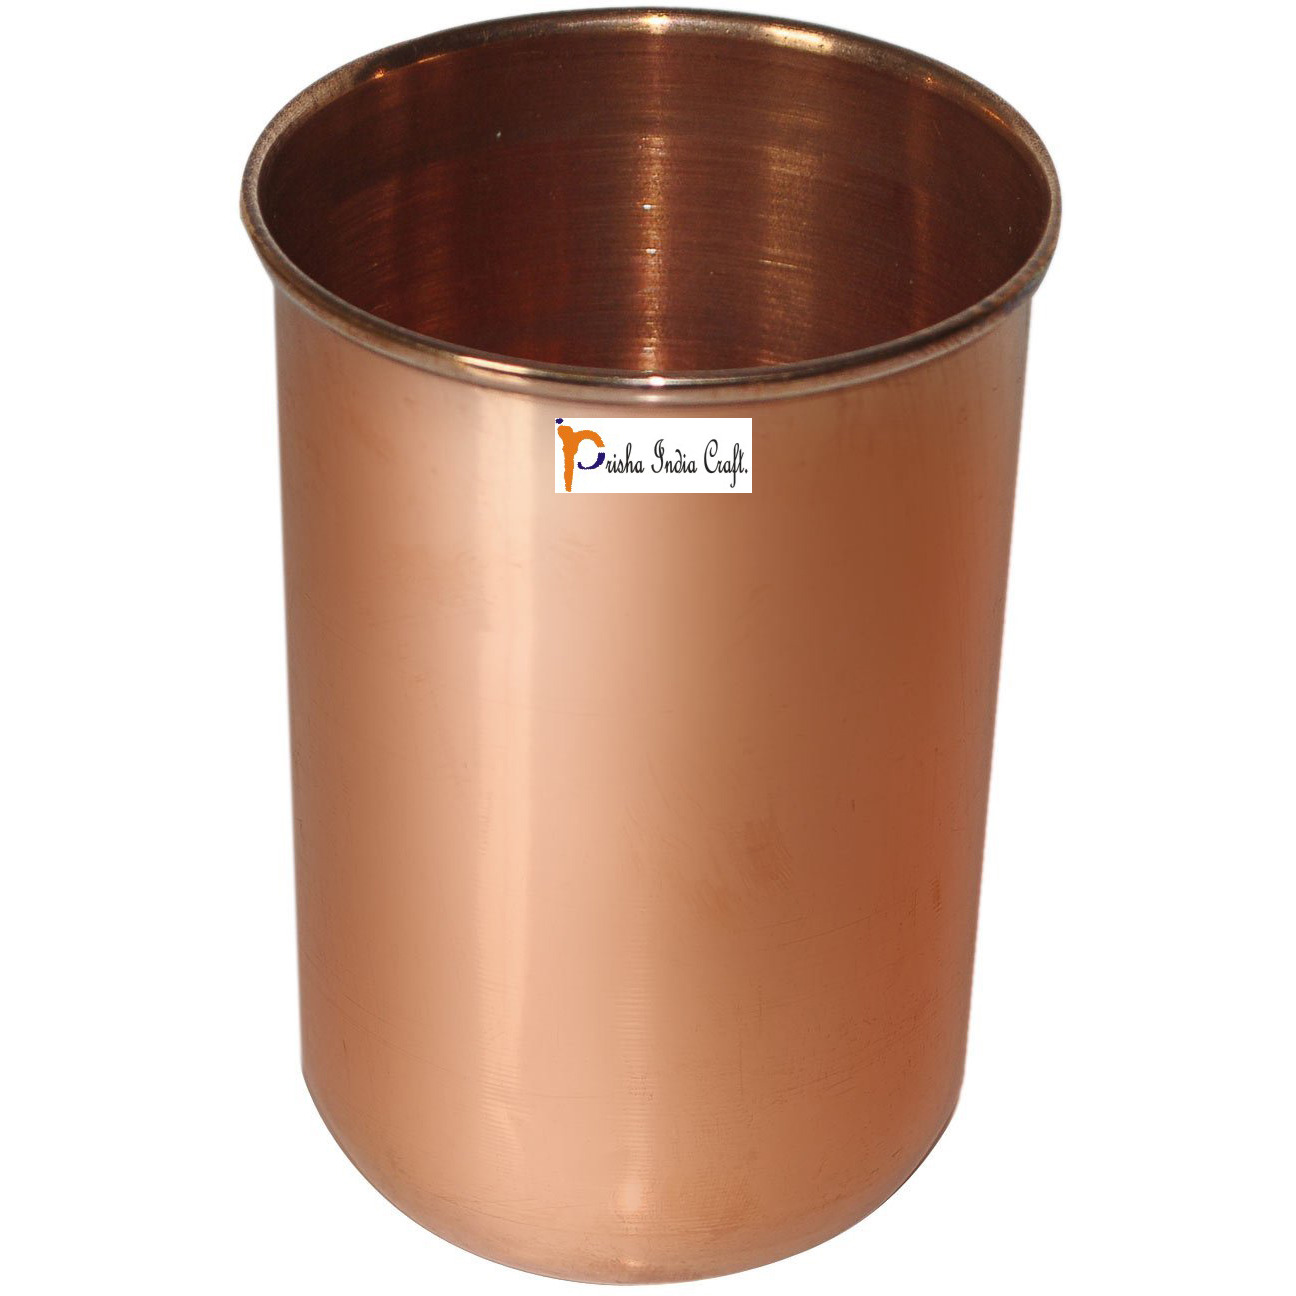 Set of 3 - Prisha India Craft B. Pure Copper Glass Cup for Water - Handmade Water Glasses - Traveller's Copper Mug for Ayurveda Benefits